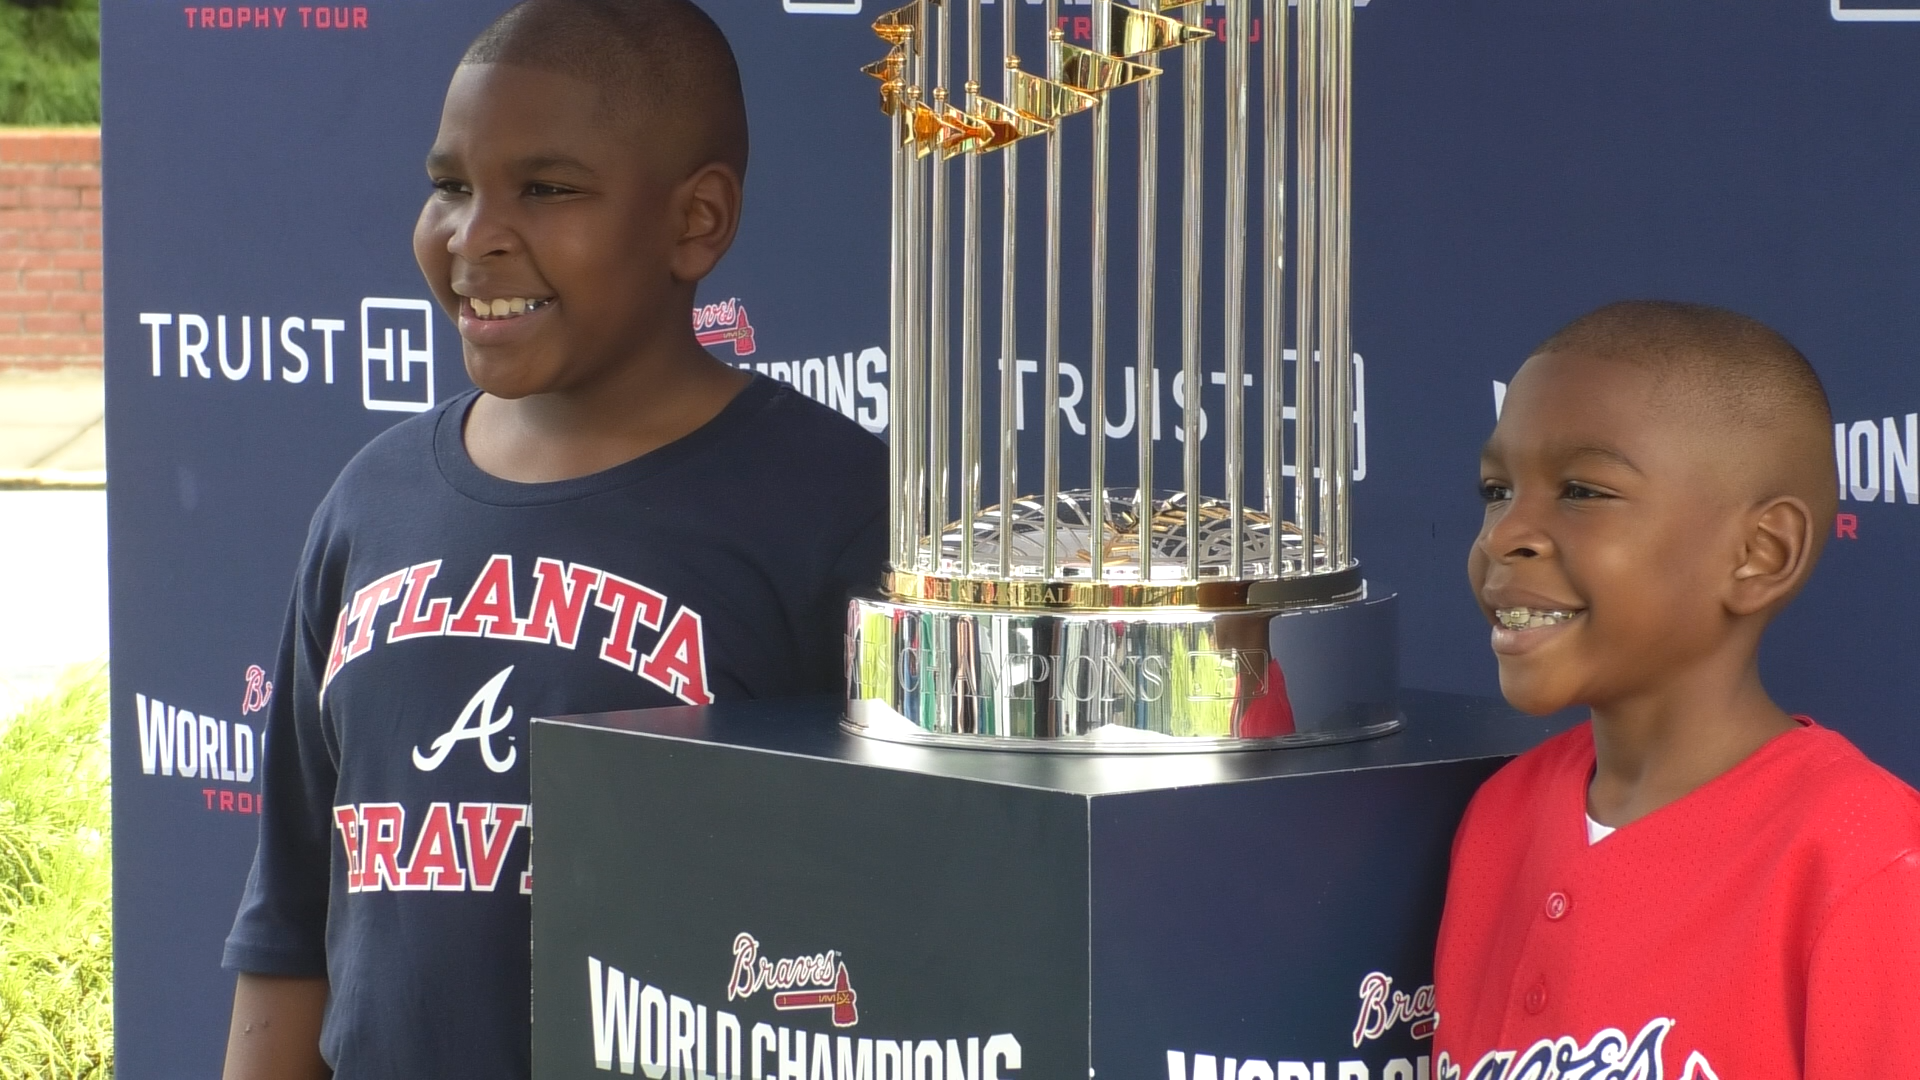 Braves World Series Championship Trophy tour makes stop in